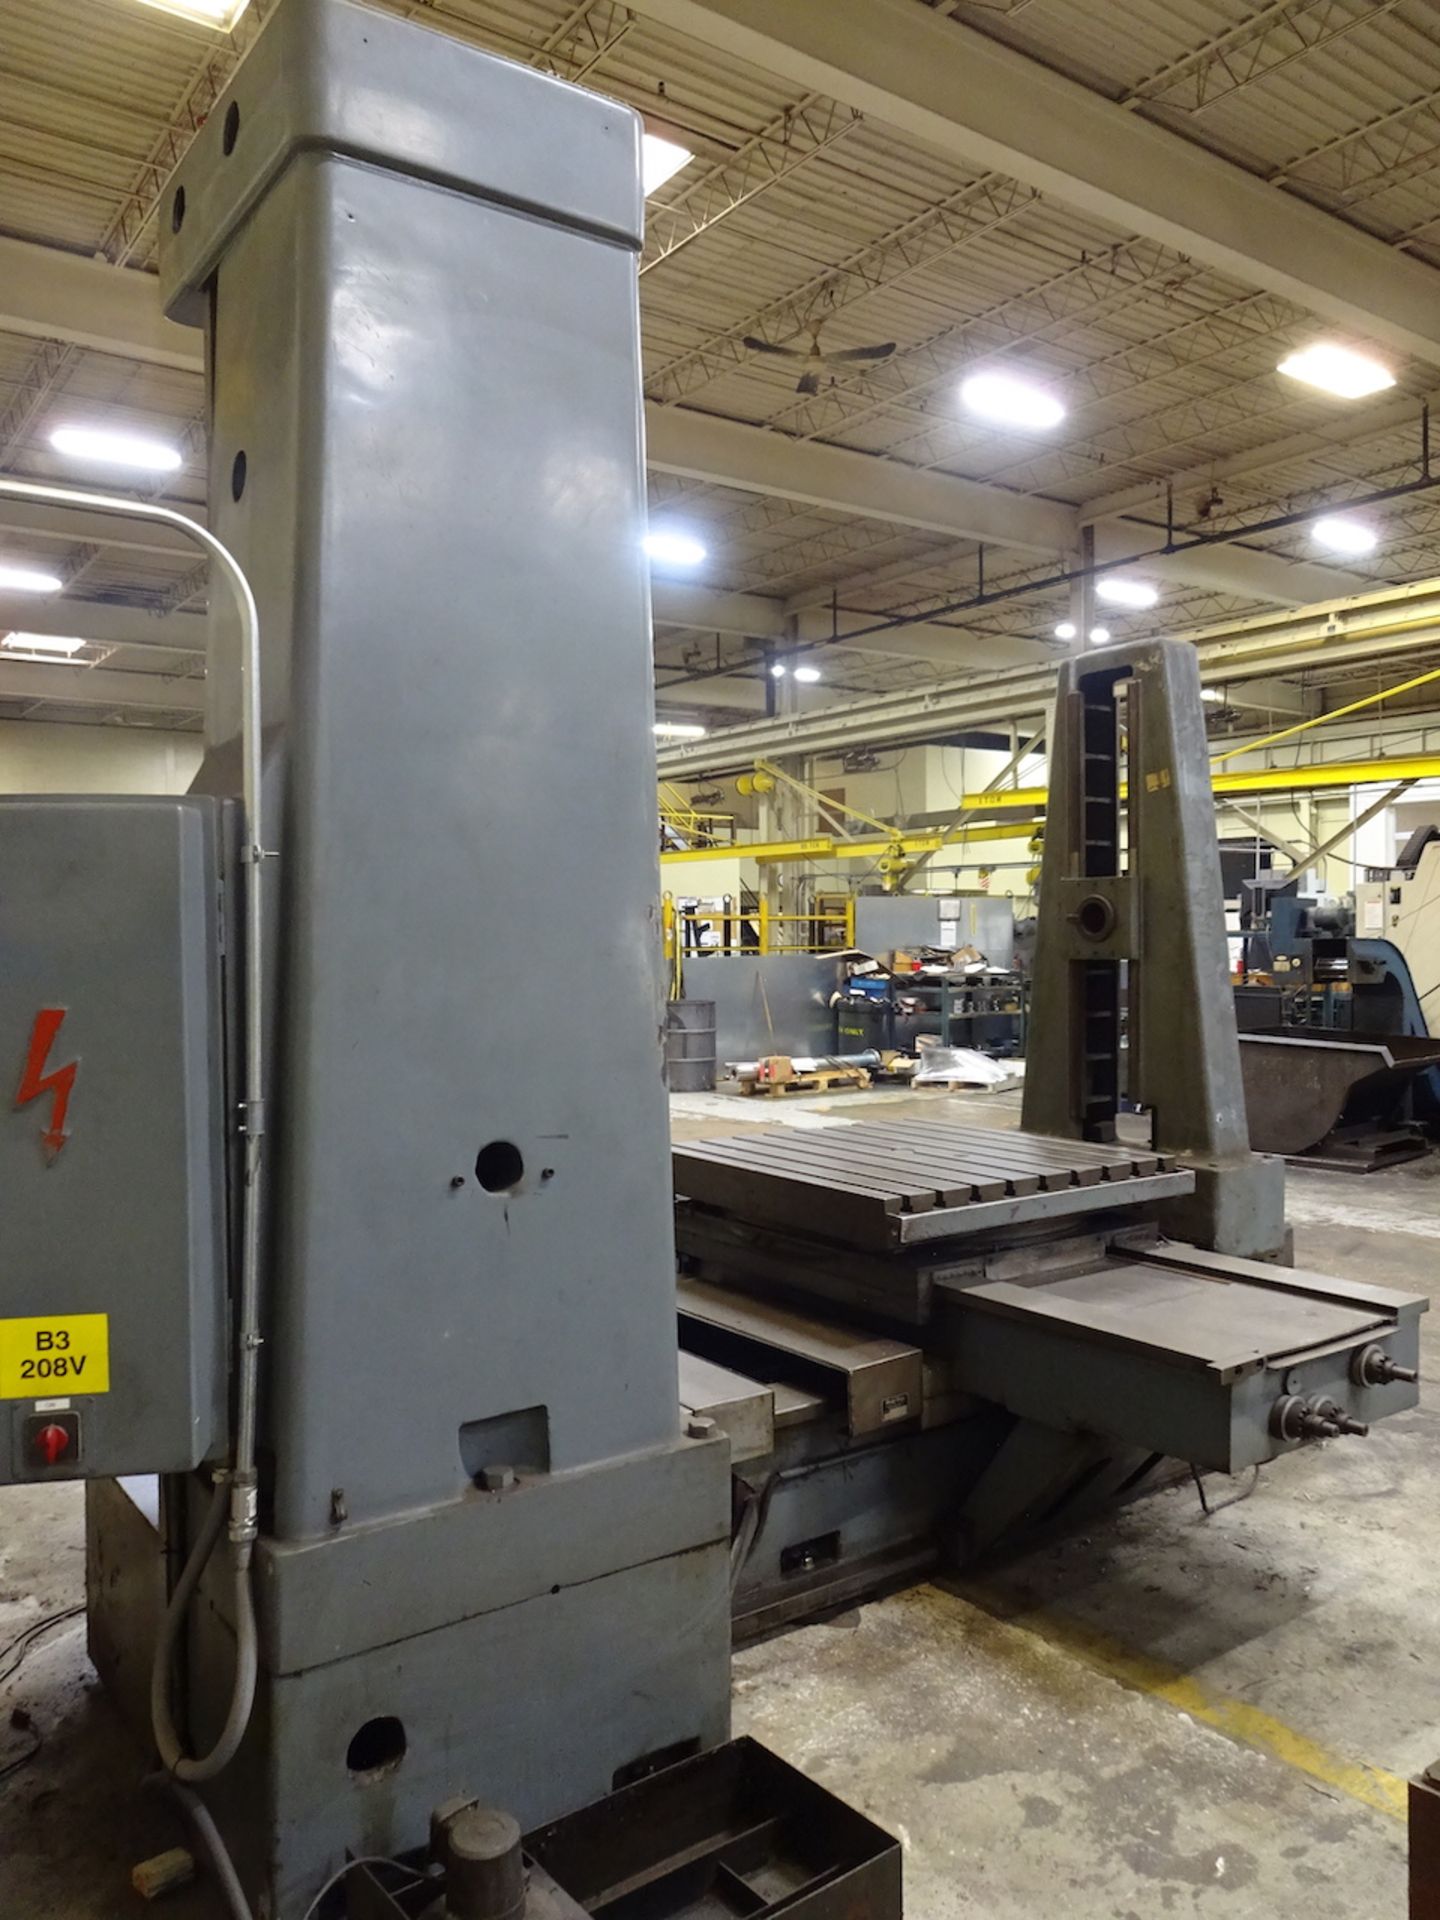 MEUSER MODEL M76BFS HORIZONTAL BORING MILL, S/N M76BFS-45286, 39 X 39 BUILT-IN ROTARY TABLE, 7. - Image 5 of 20